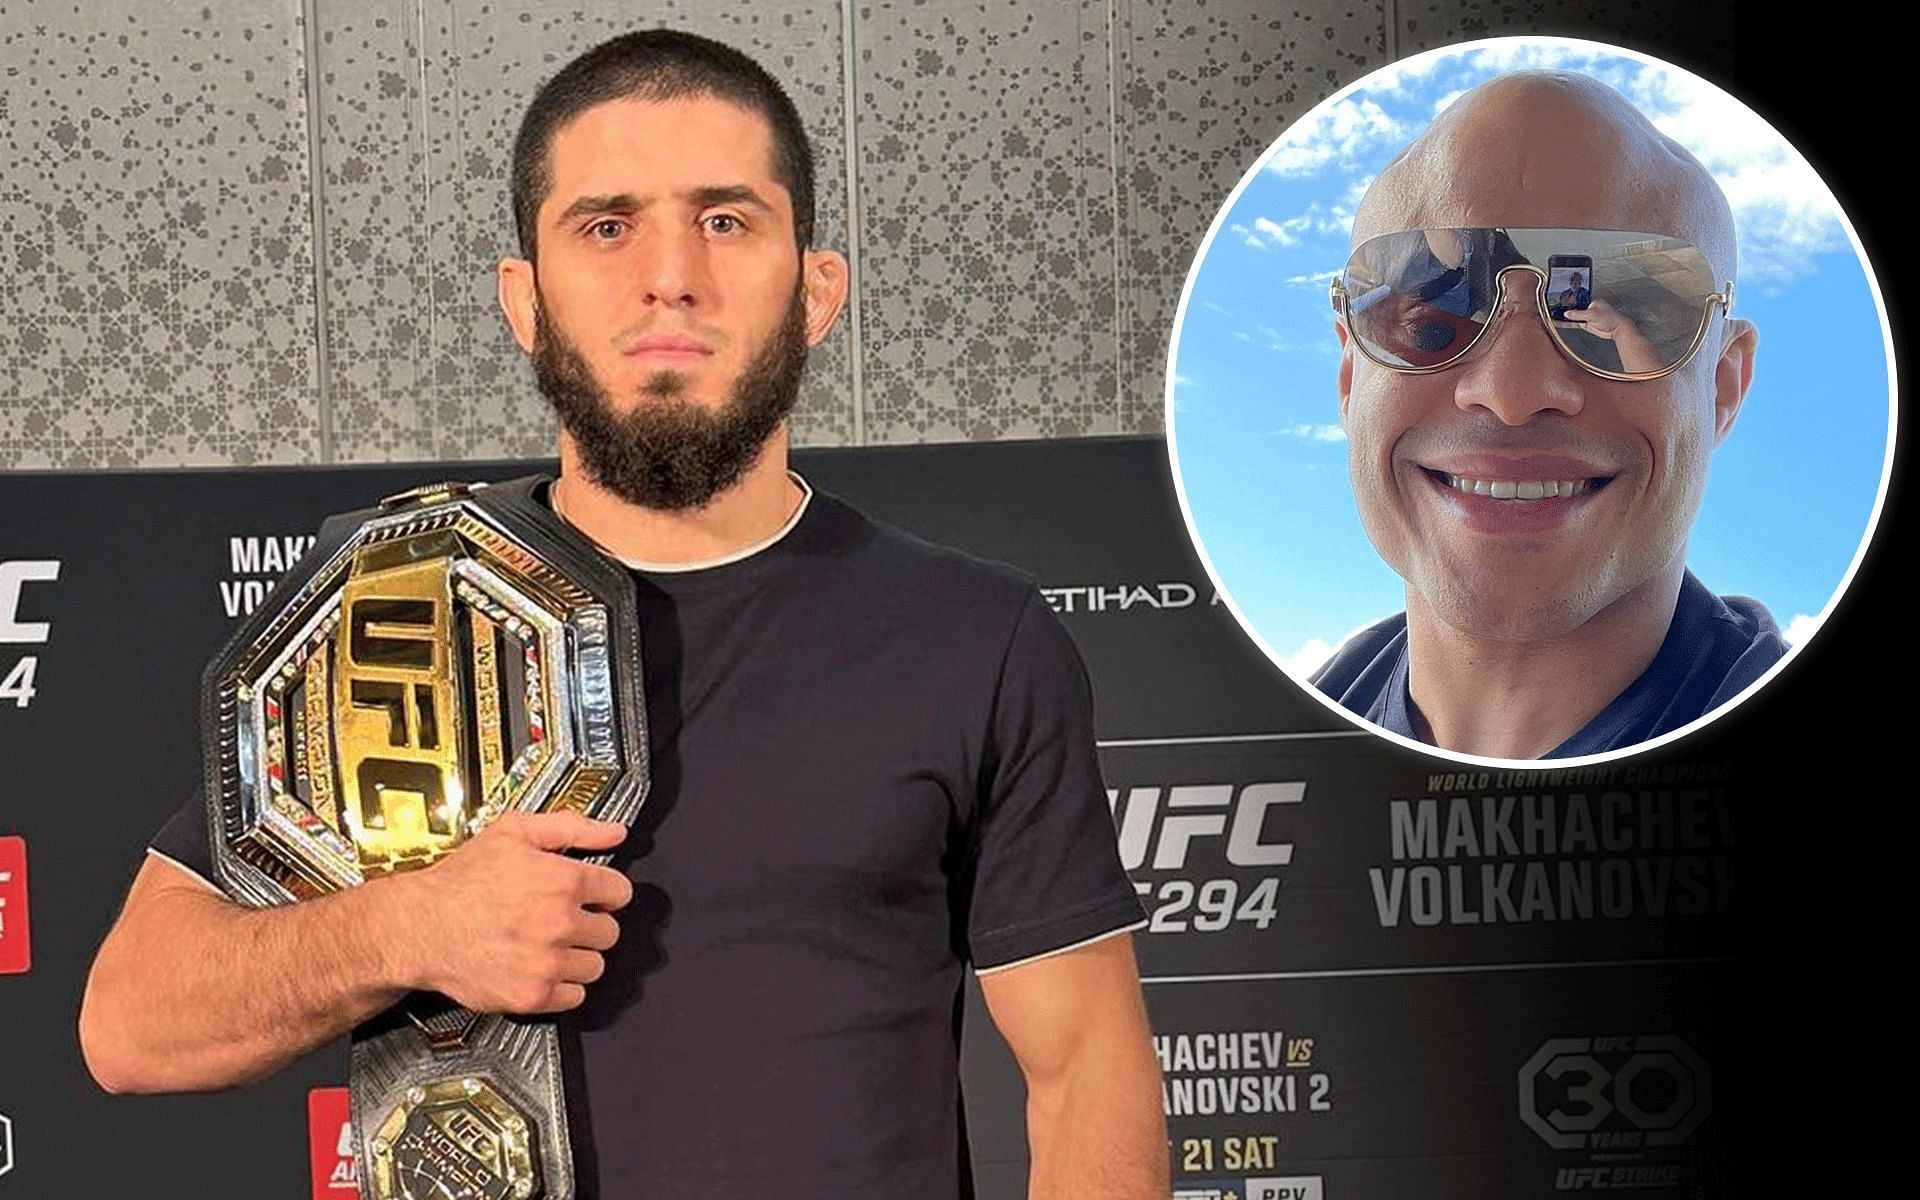 Islam Makhachev (left) received words of high praise from Ali Abdelaziz (right) [Images courtesy: @islam_makhachev and @aliabdelaziz on Instagram]